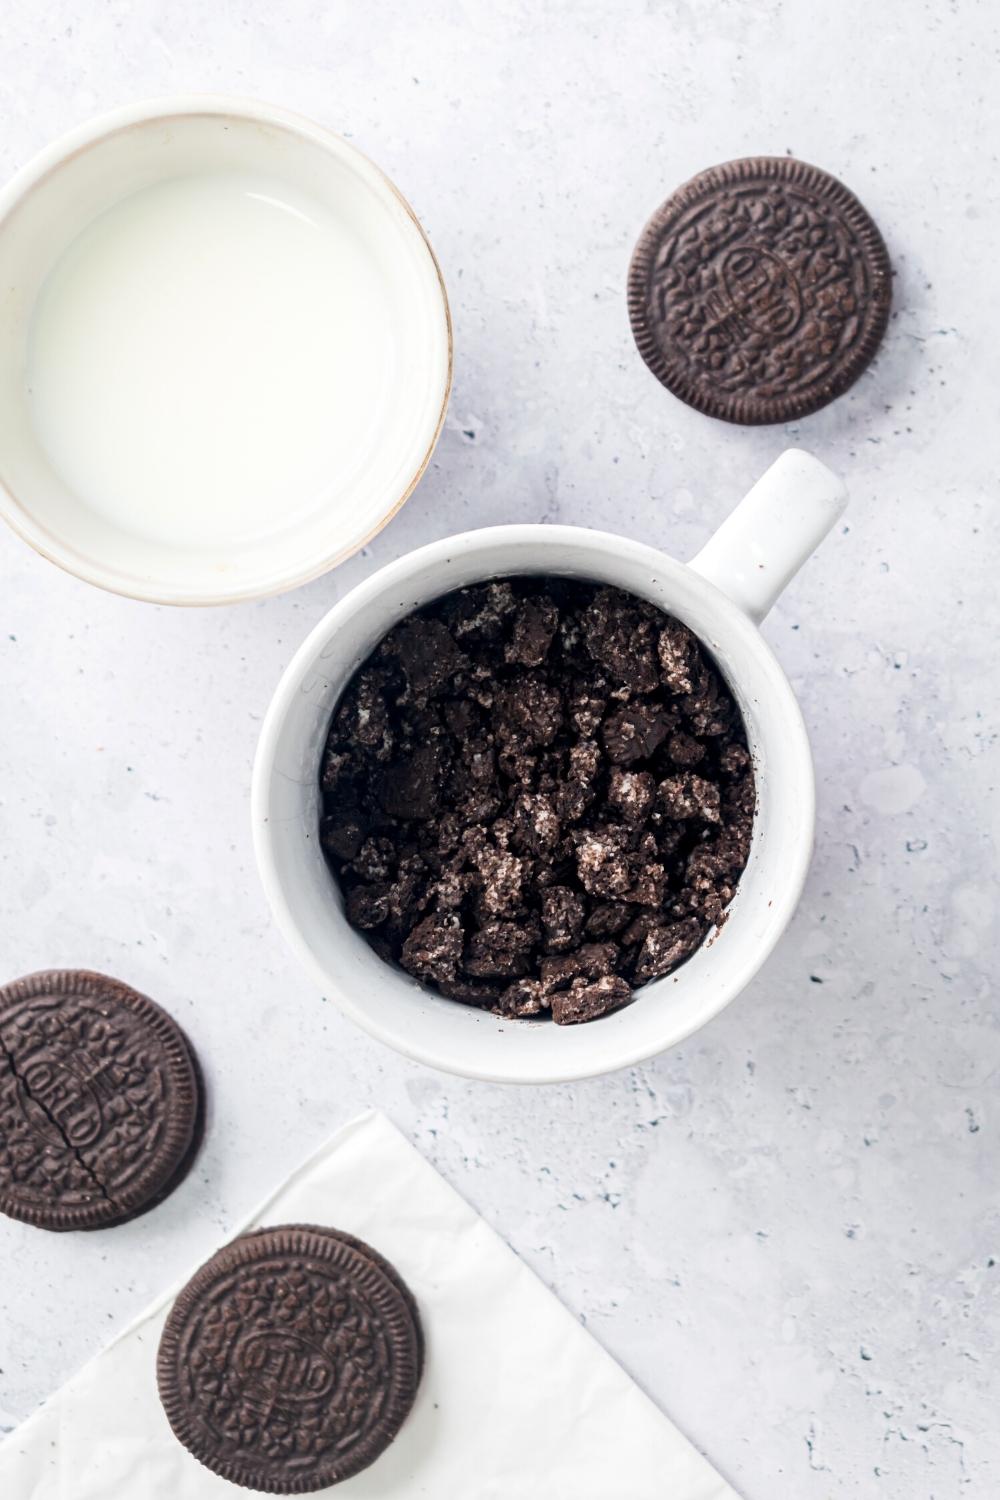 Crushed up Oreos in a white mug and a gray counter. Two Oreos are in front of it, one Oreo is behind it, and a glass of milk is behind it.